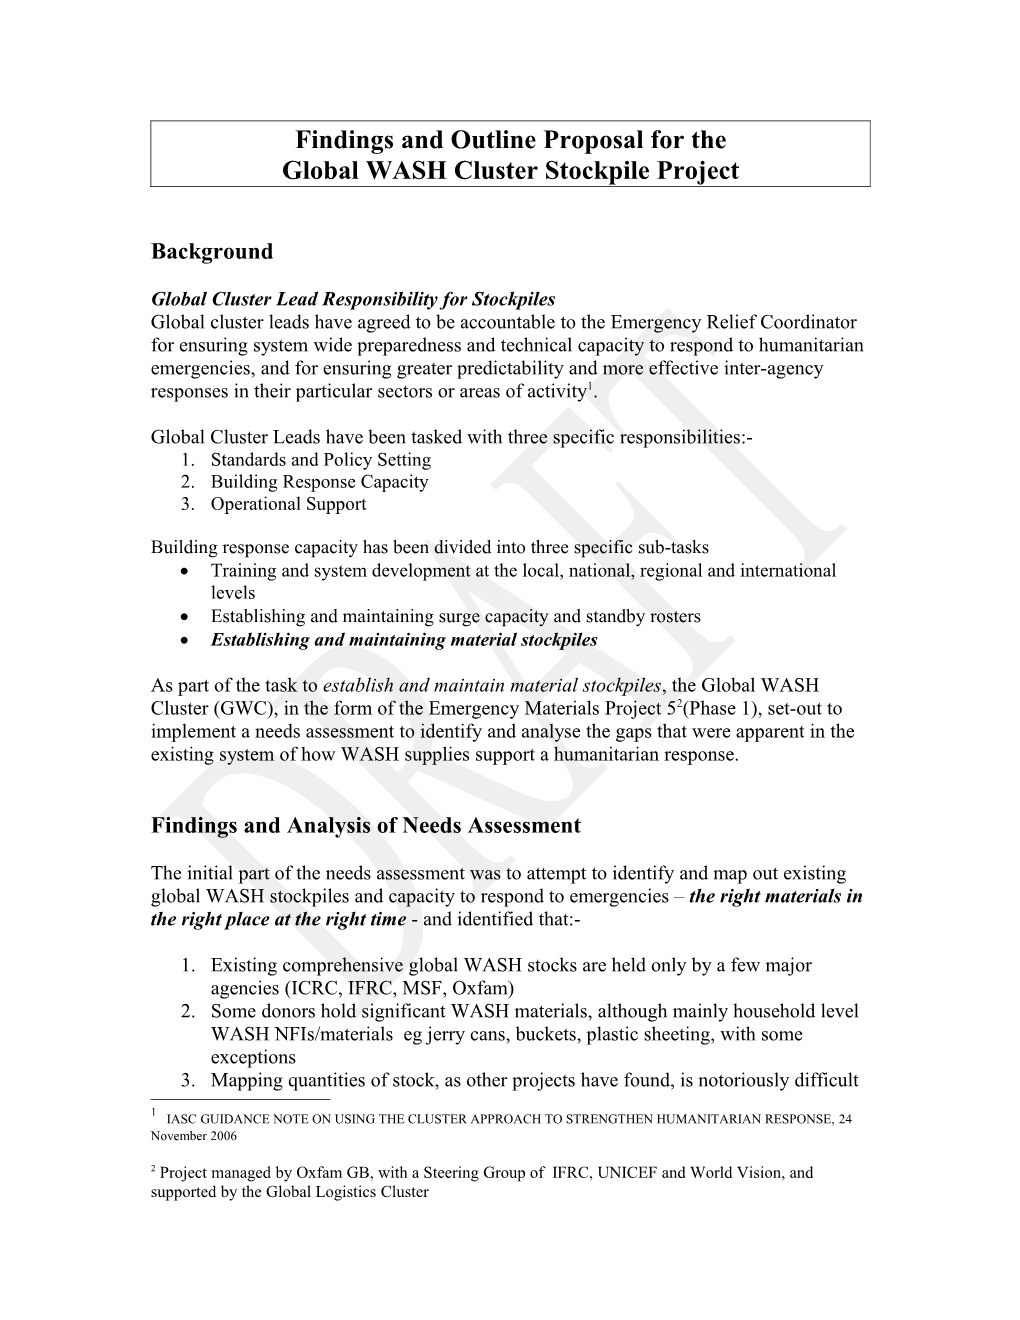 Findings and Outline Proposal for The